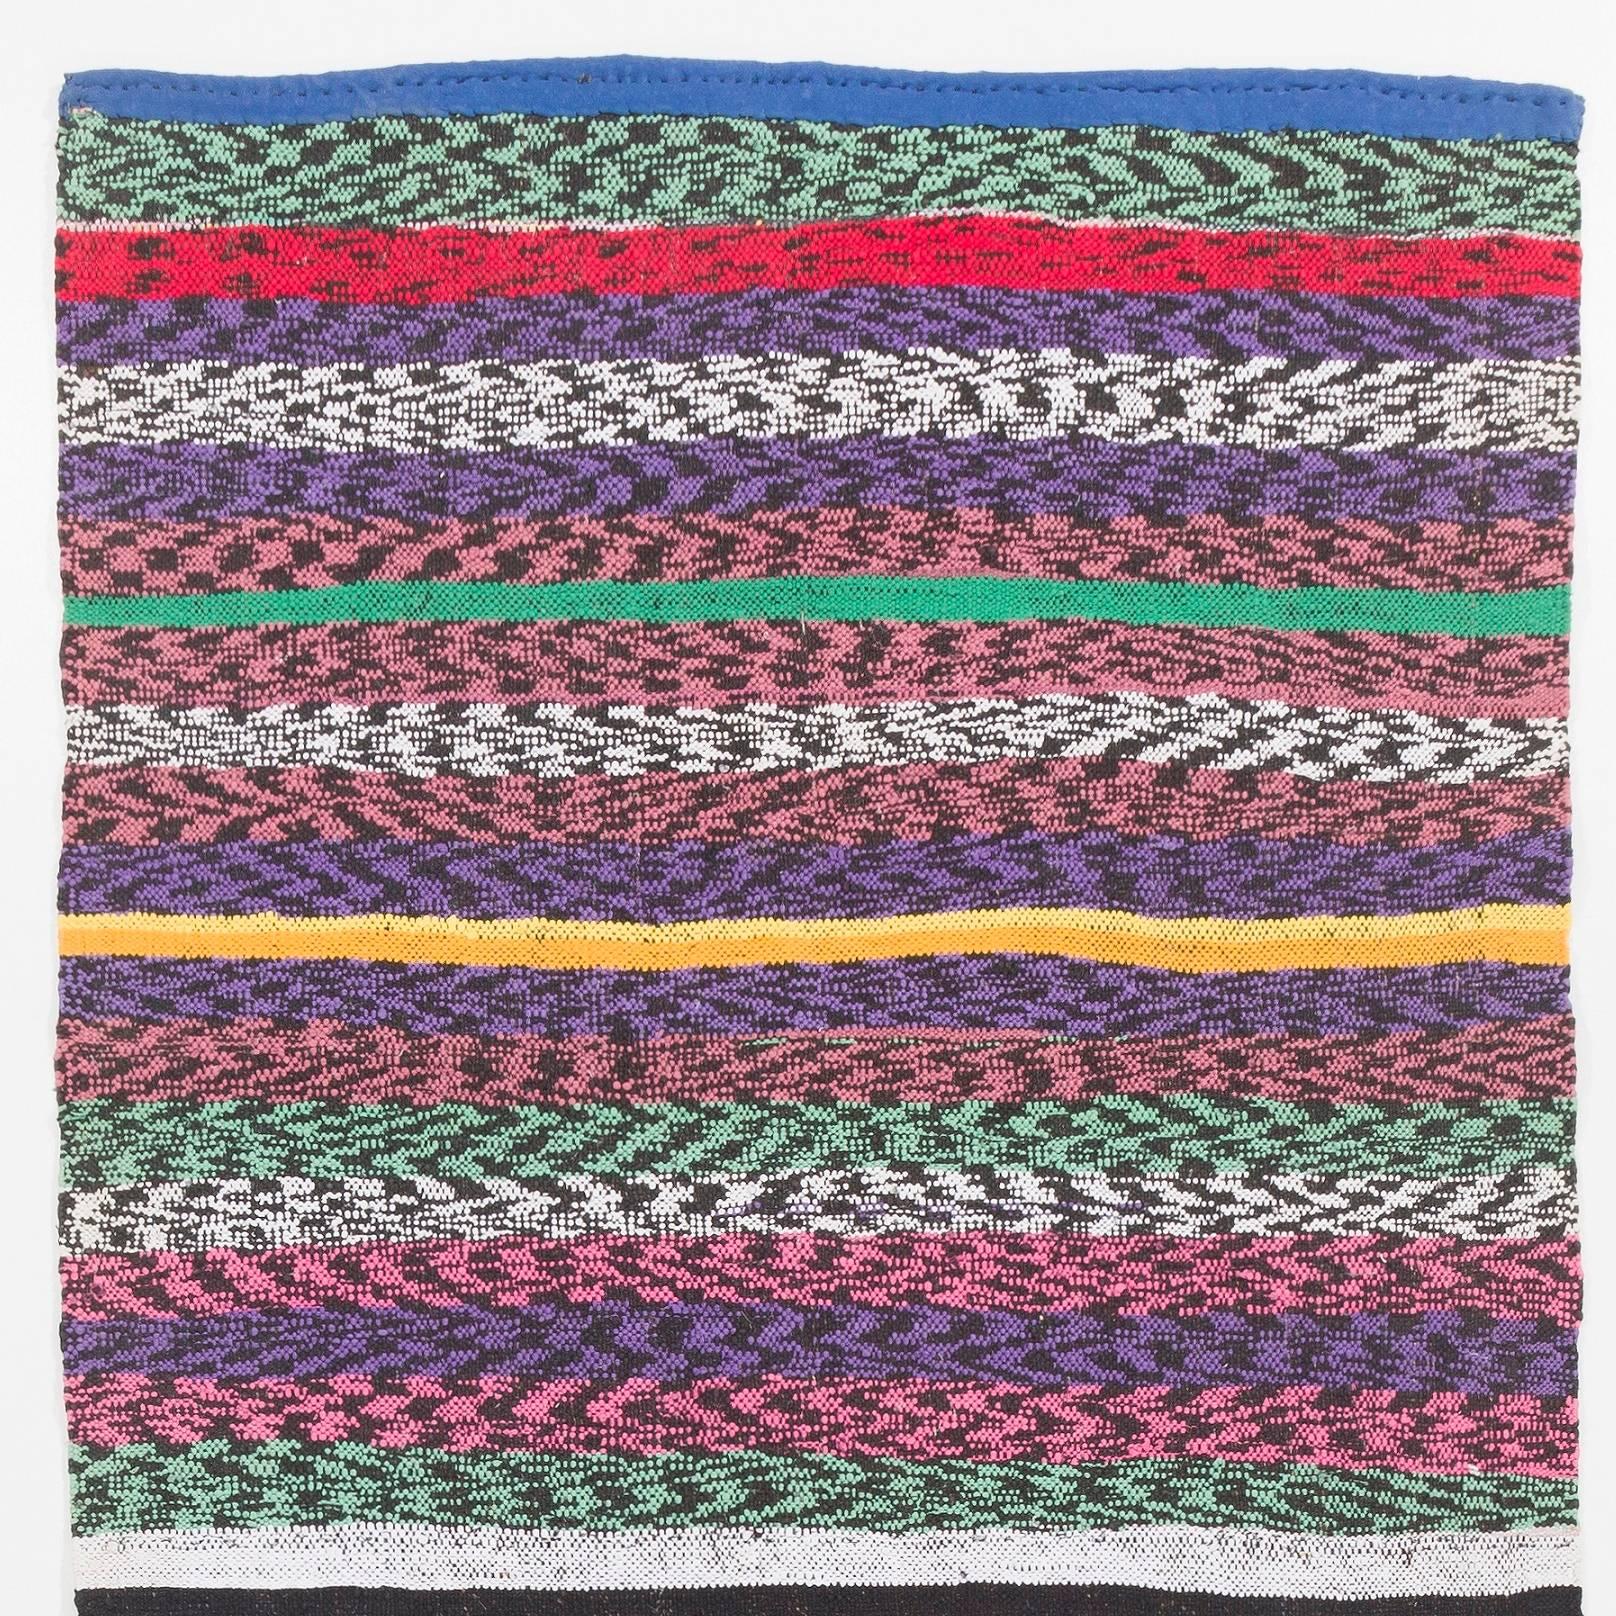 Hand-Woven Colorful Kilim Runner. Flatweave Cotton Floor Covering